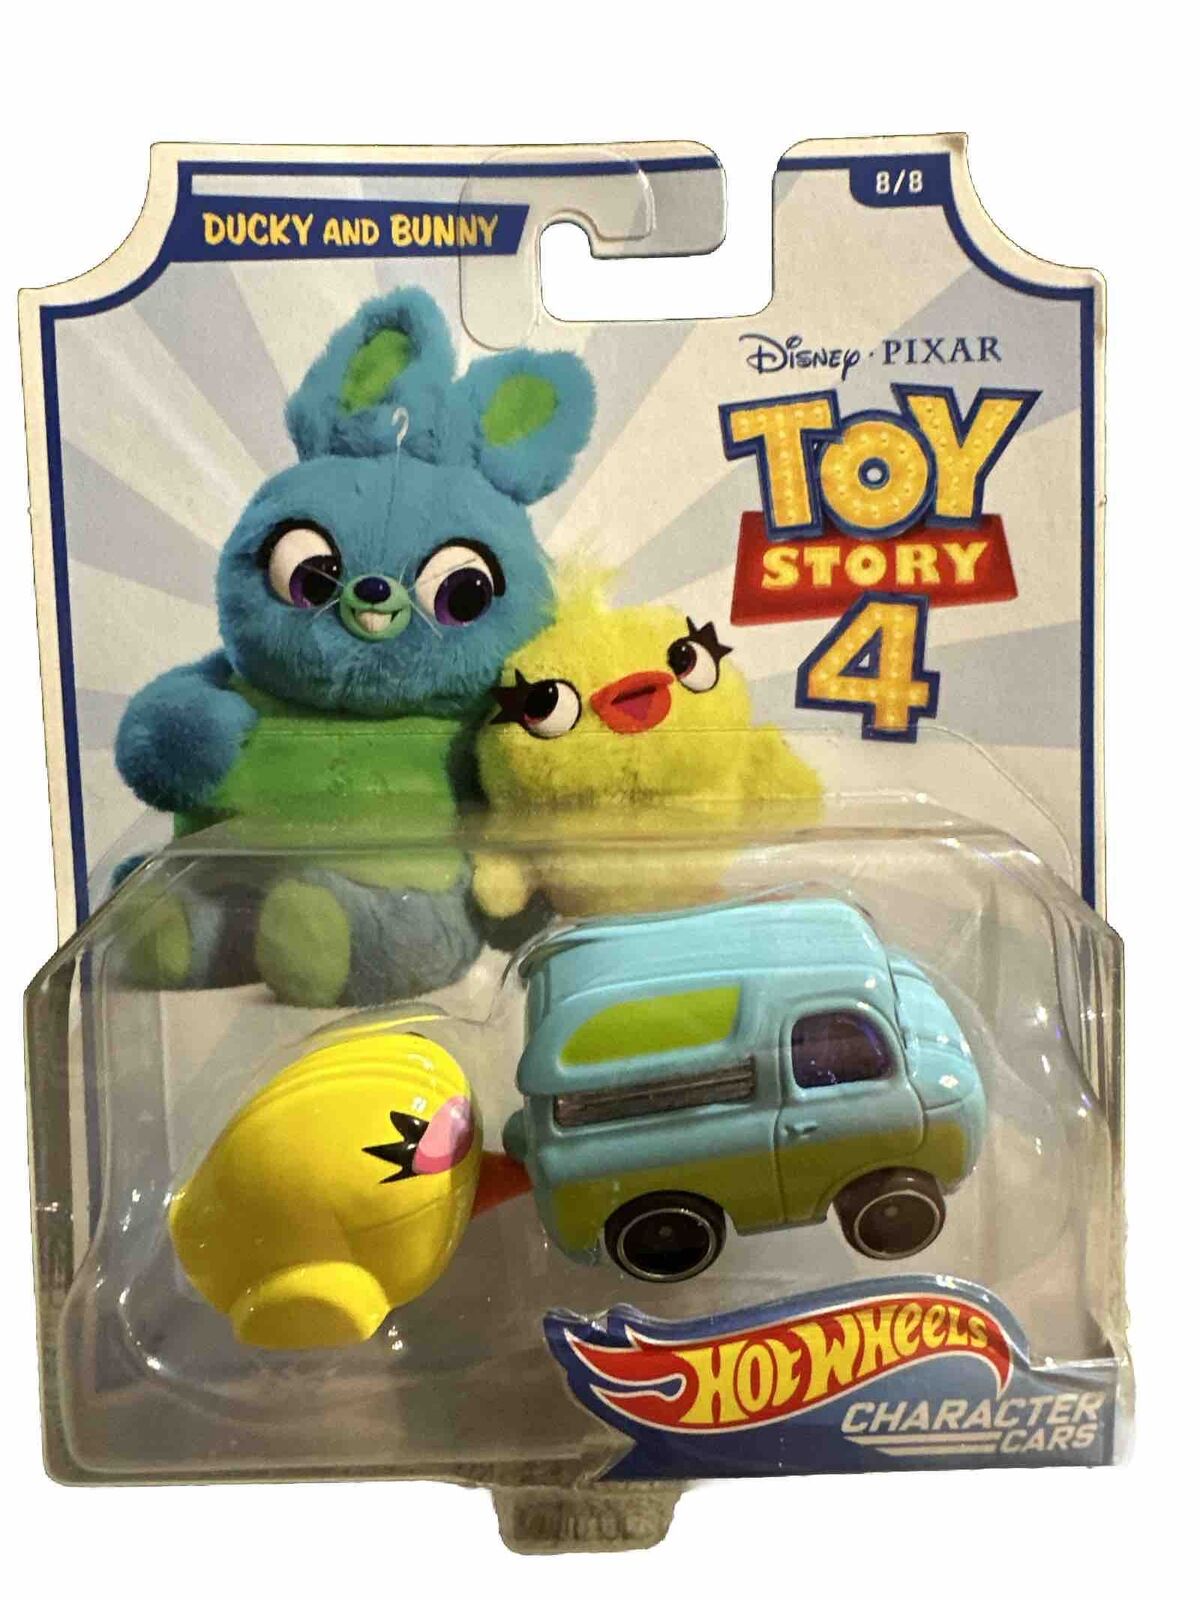 2018 Hot Wheels Toy Story 4 Character Cars Ducky AND Bunny NEW!!!